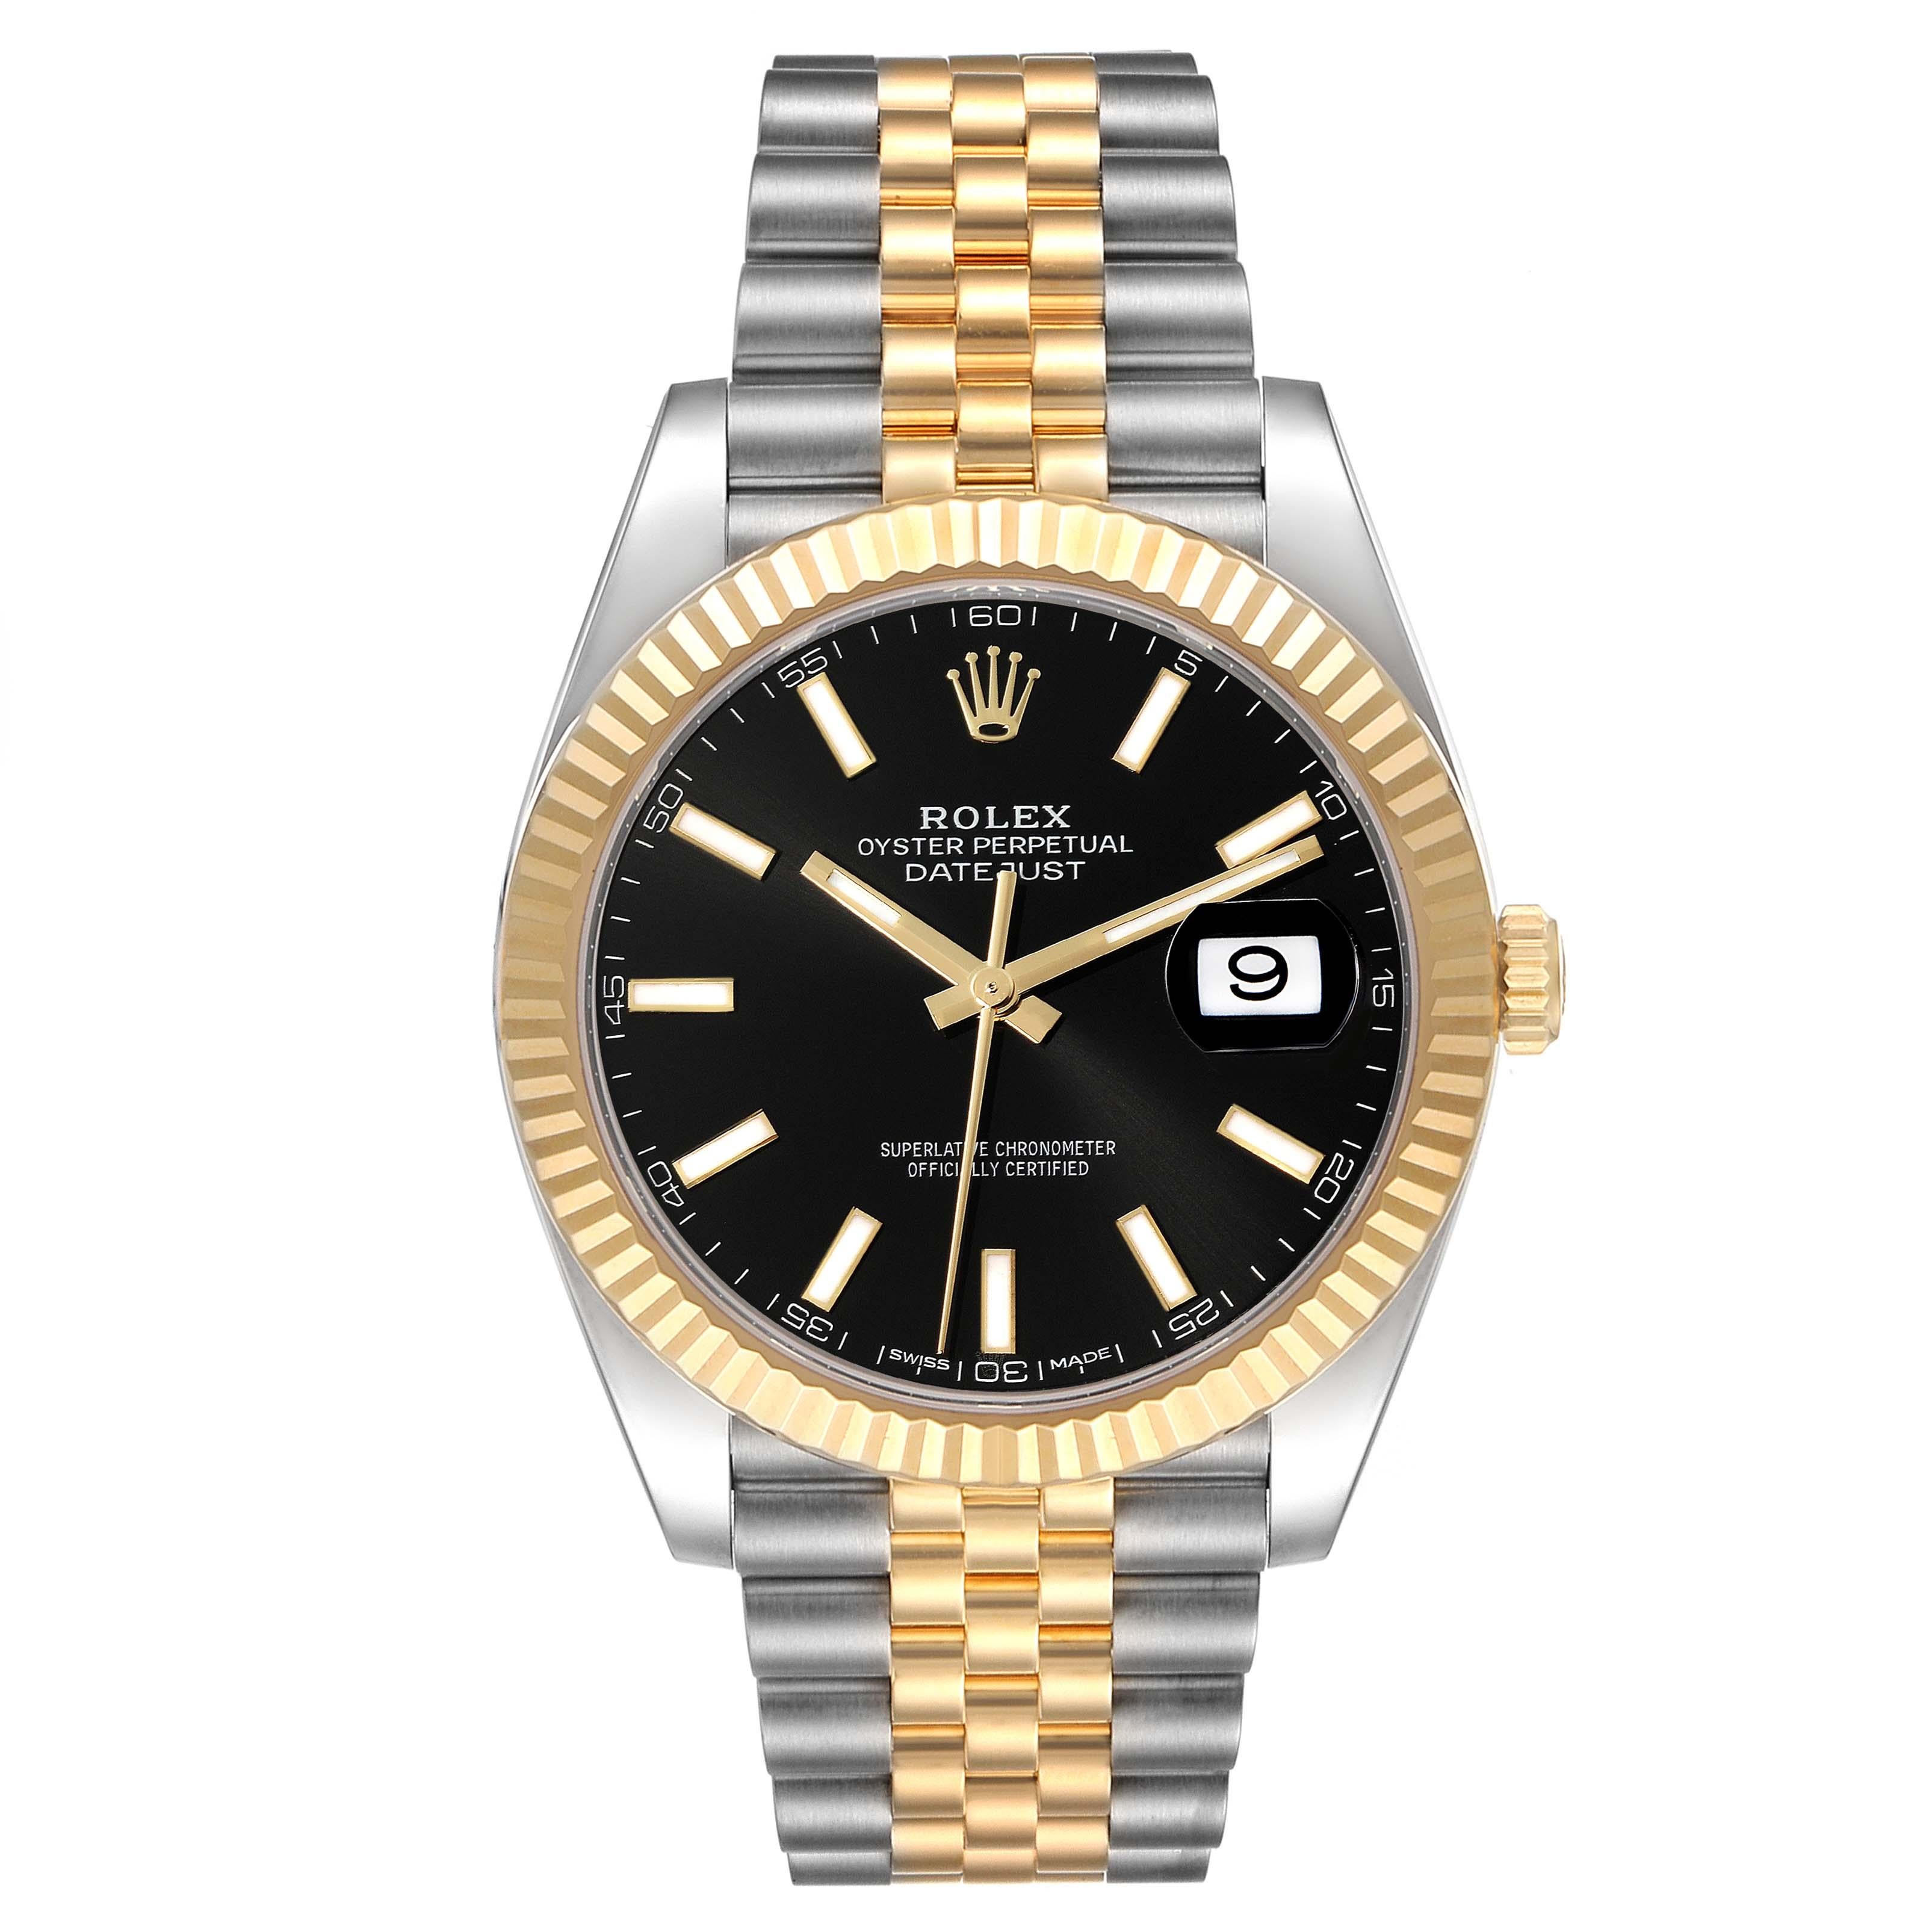 Rolex Datejust 41 Steel Yellow Gold Black Dial Mens Watch 126333 Box Card In Excellent Condition For Sale In Atlanta, GA